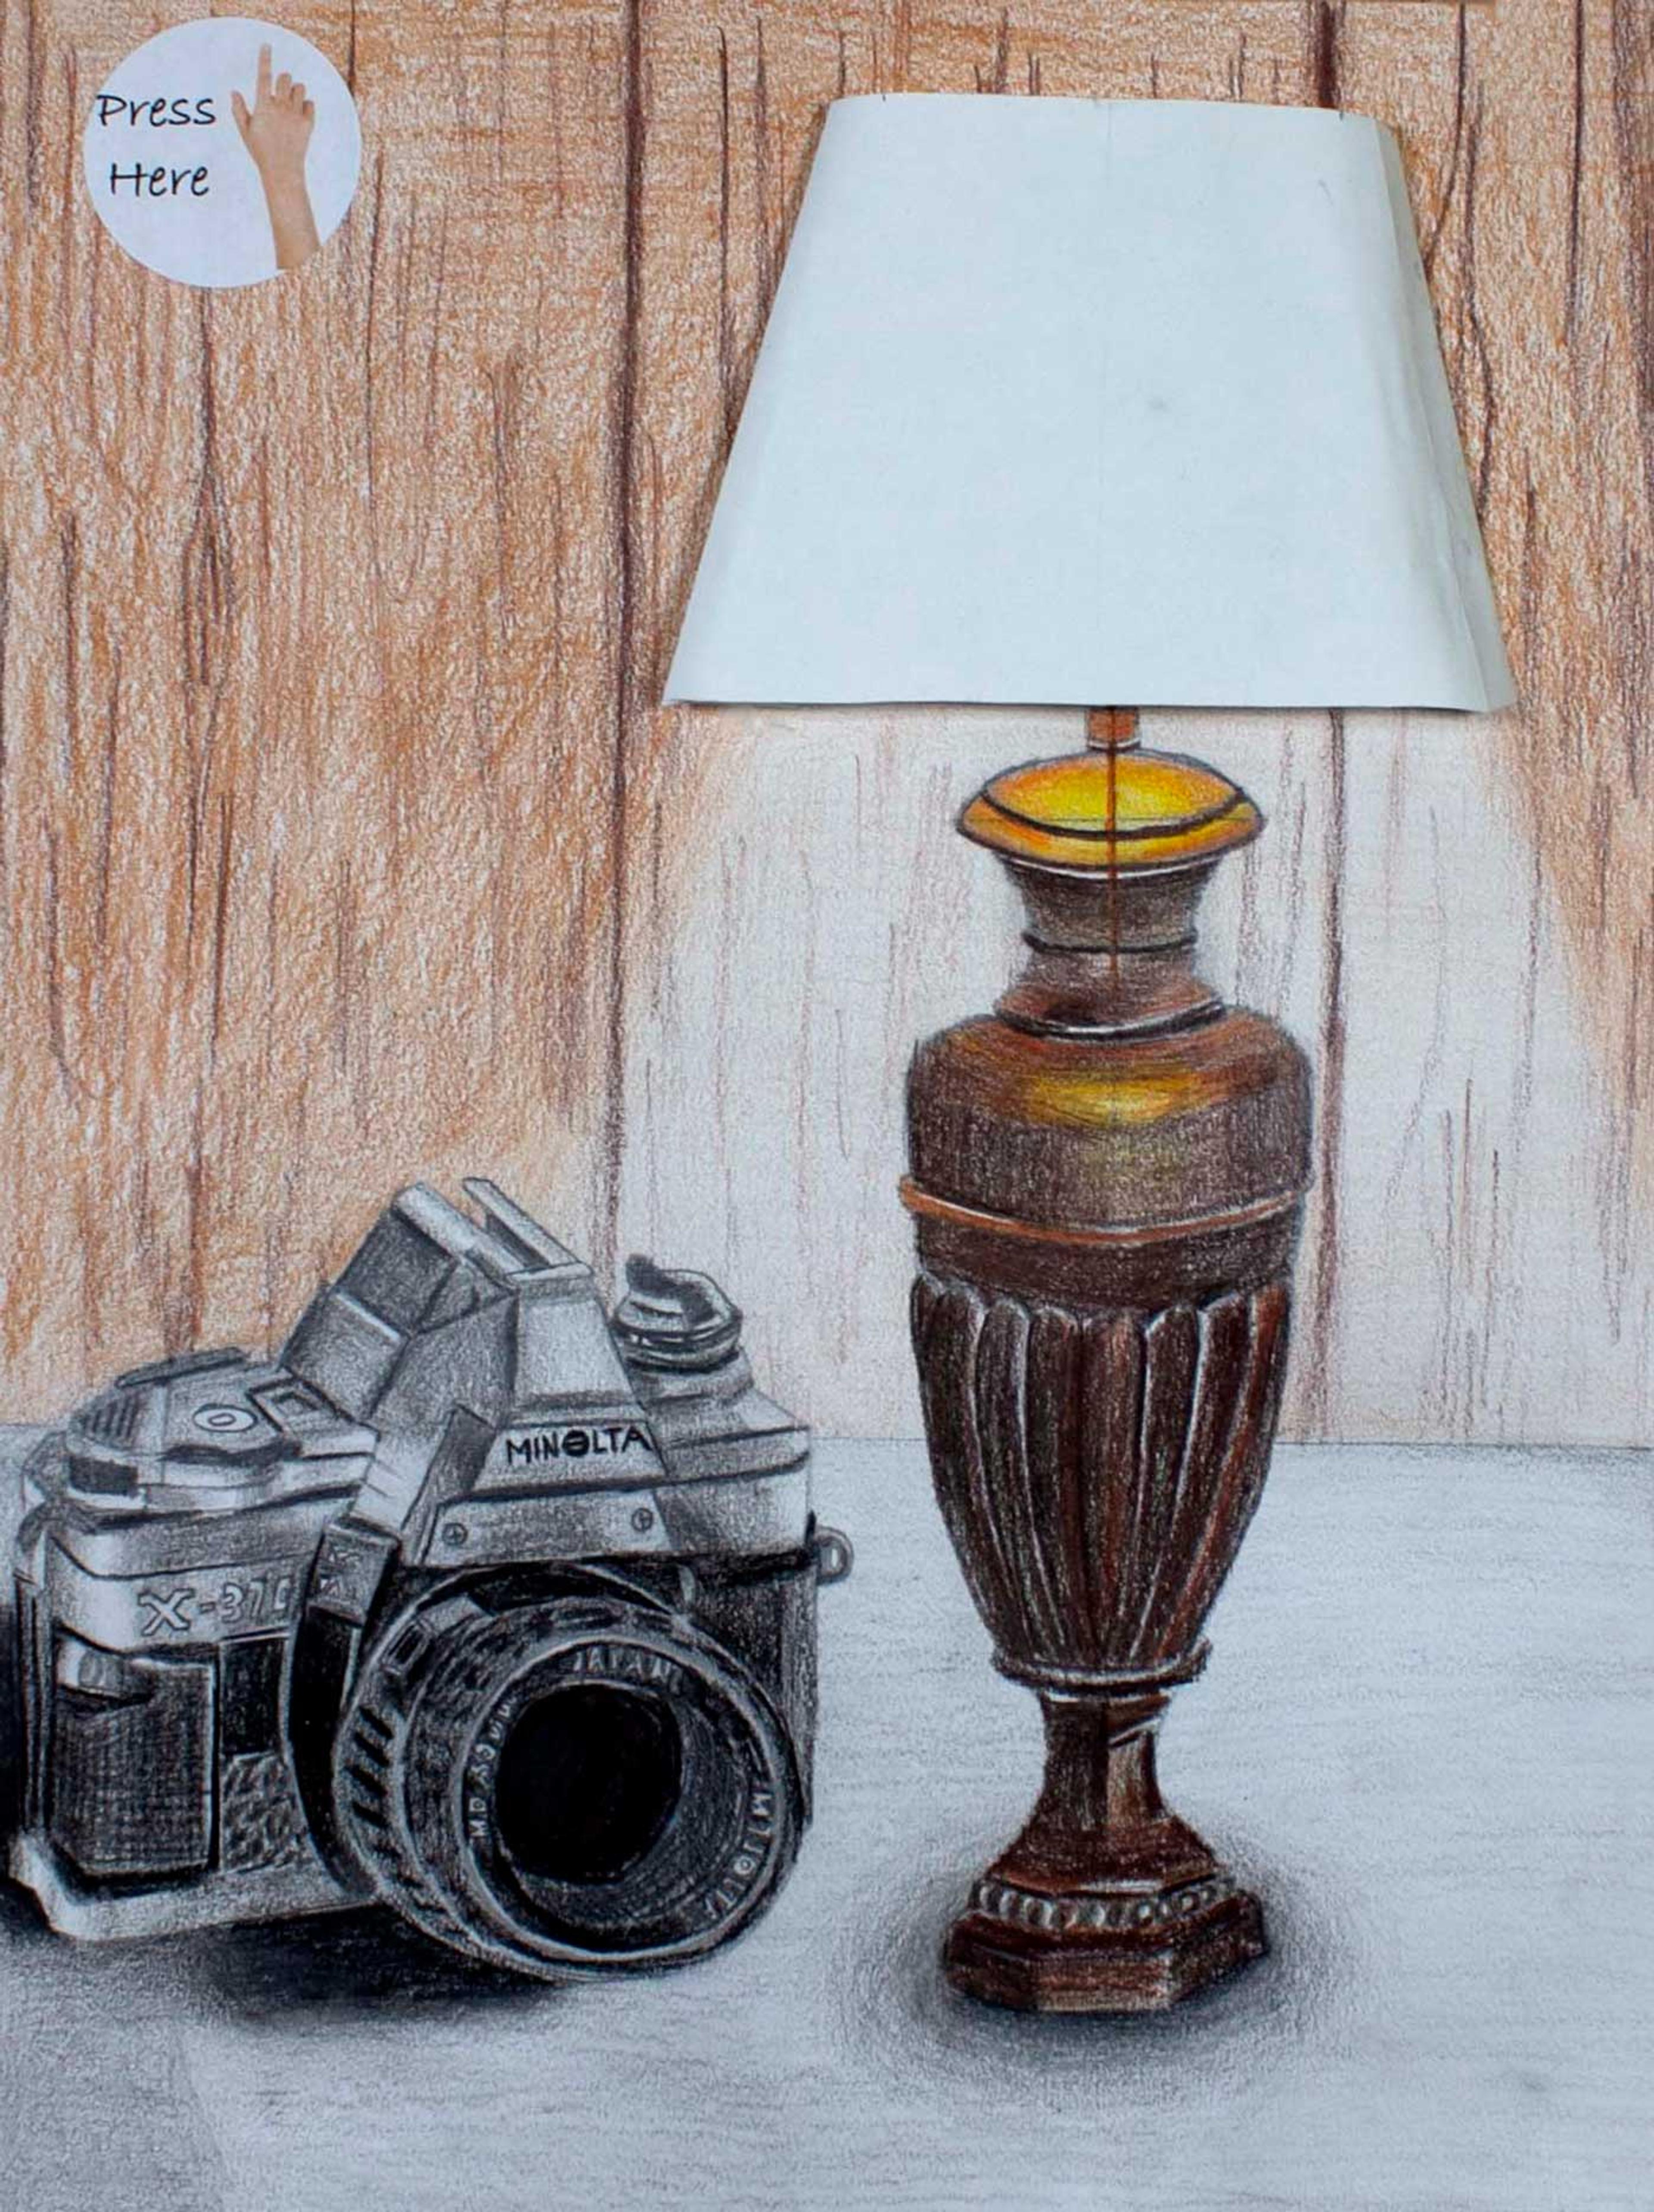 Painting of a bronze lamp with a white lampshade and a black camera.